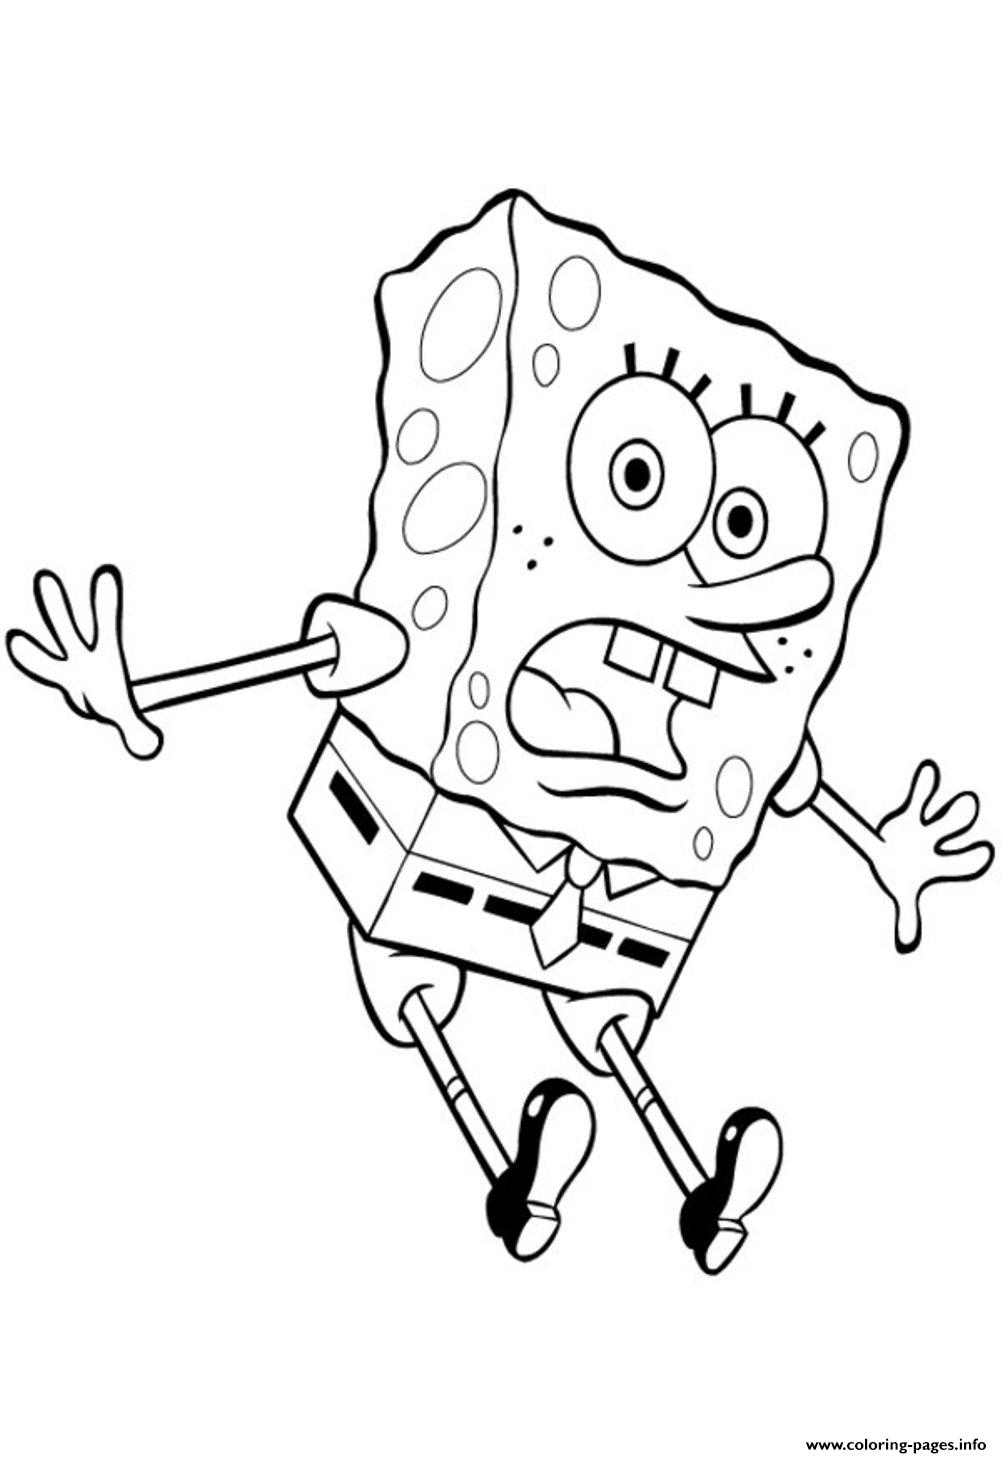 Coloring Pages Spongebob For Kidsf5ef coloring